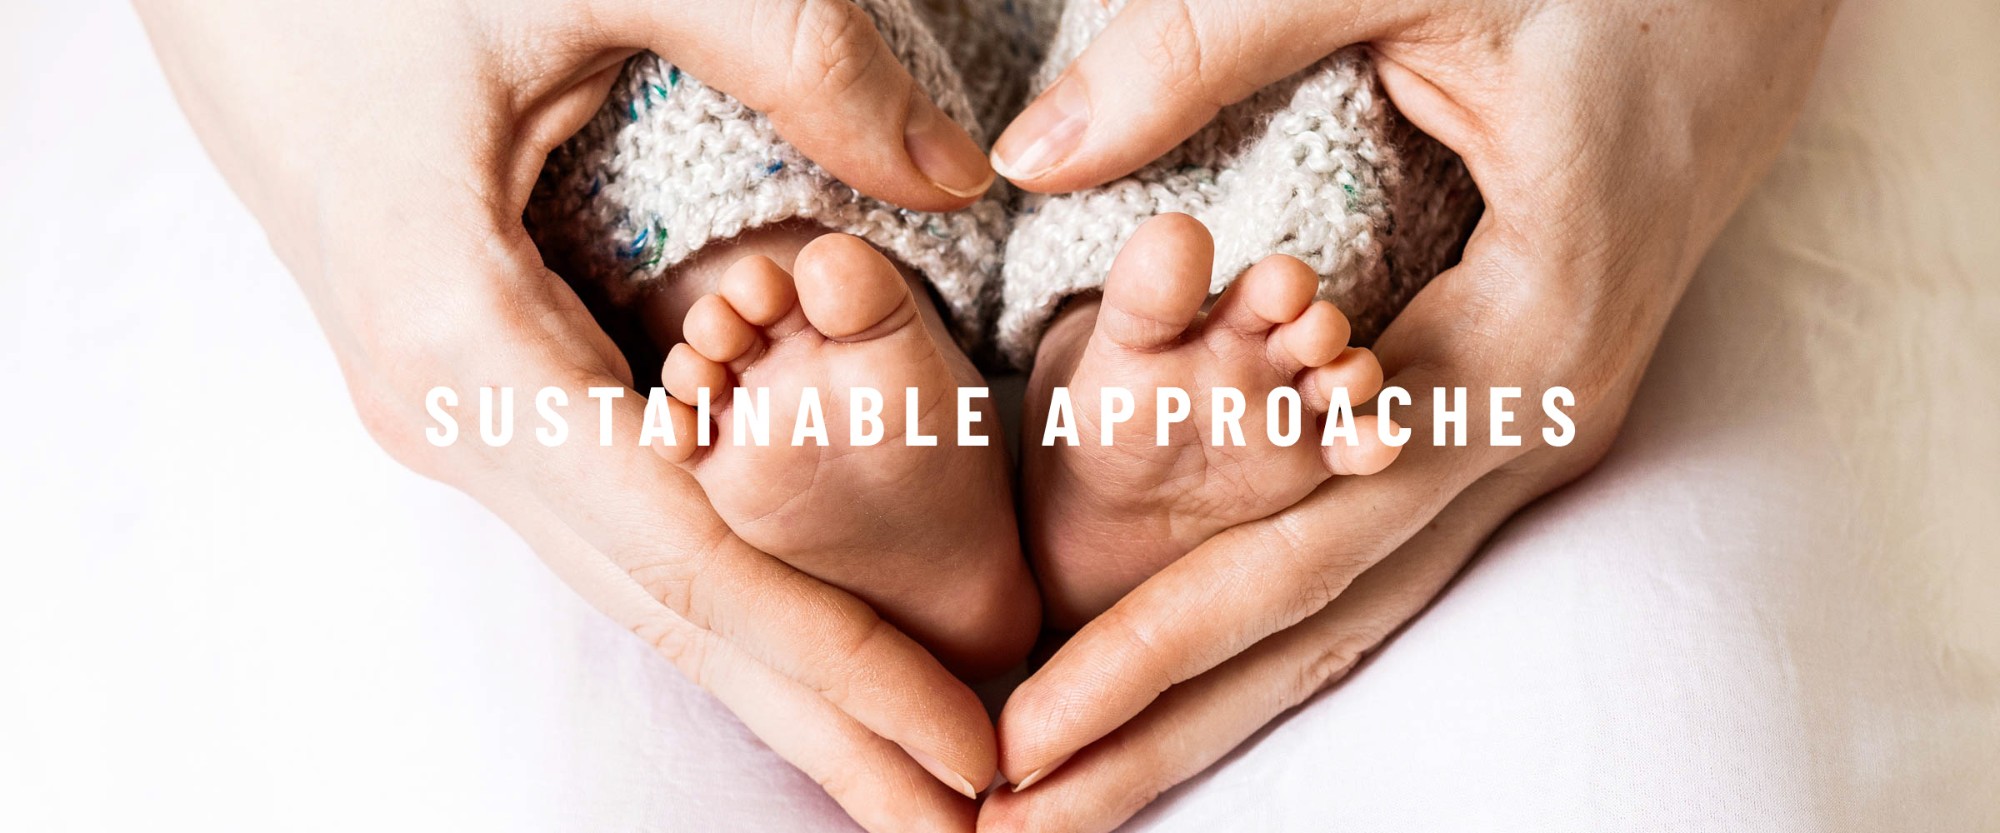 Image: Parent holding babies little feet Text: Sustainable approaches